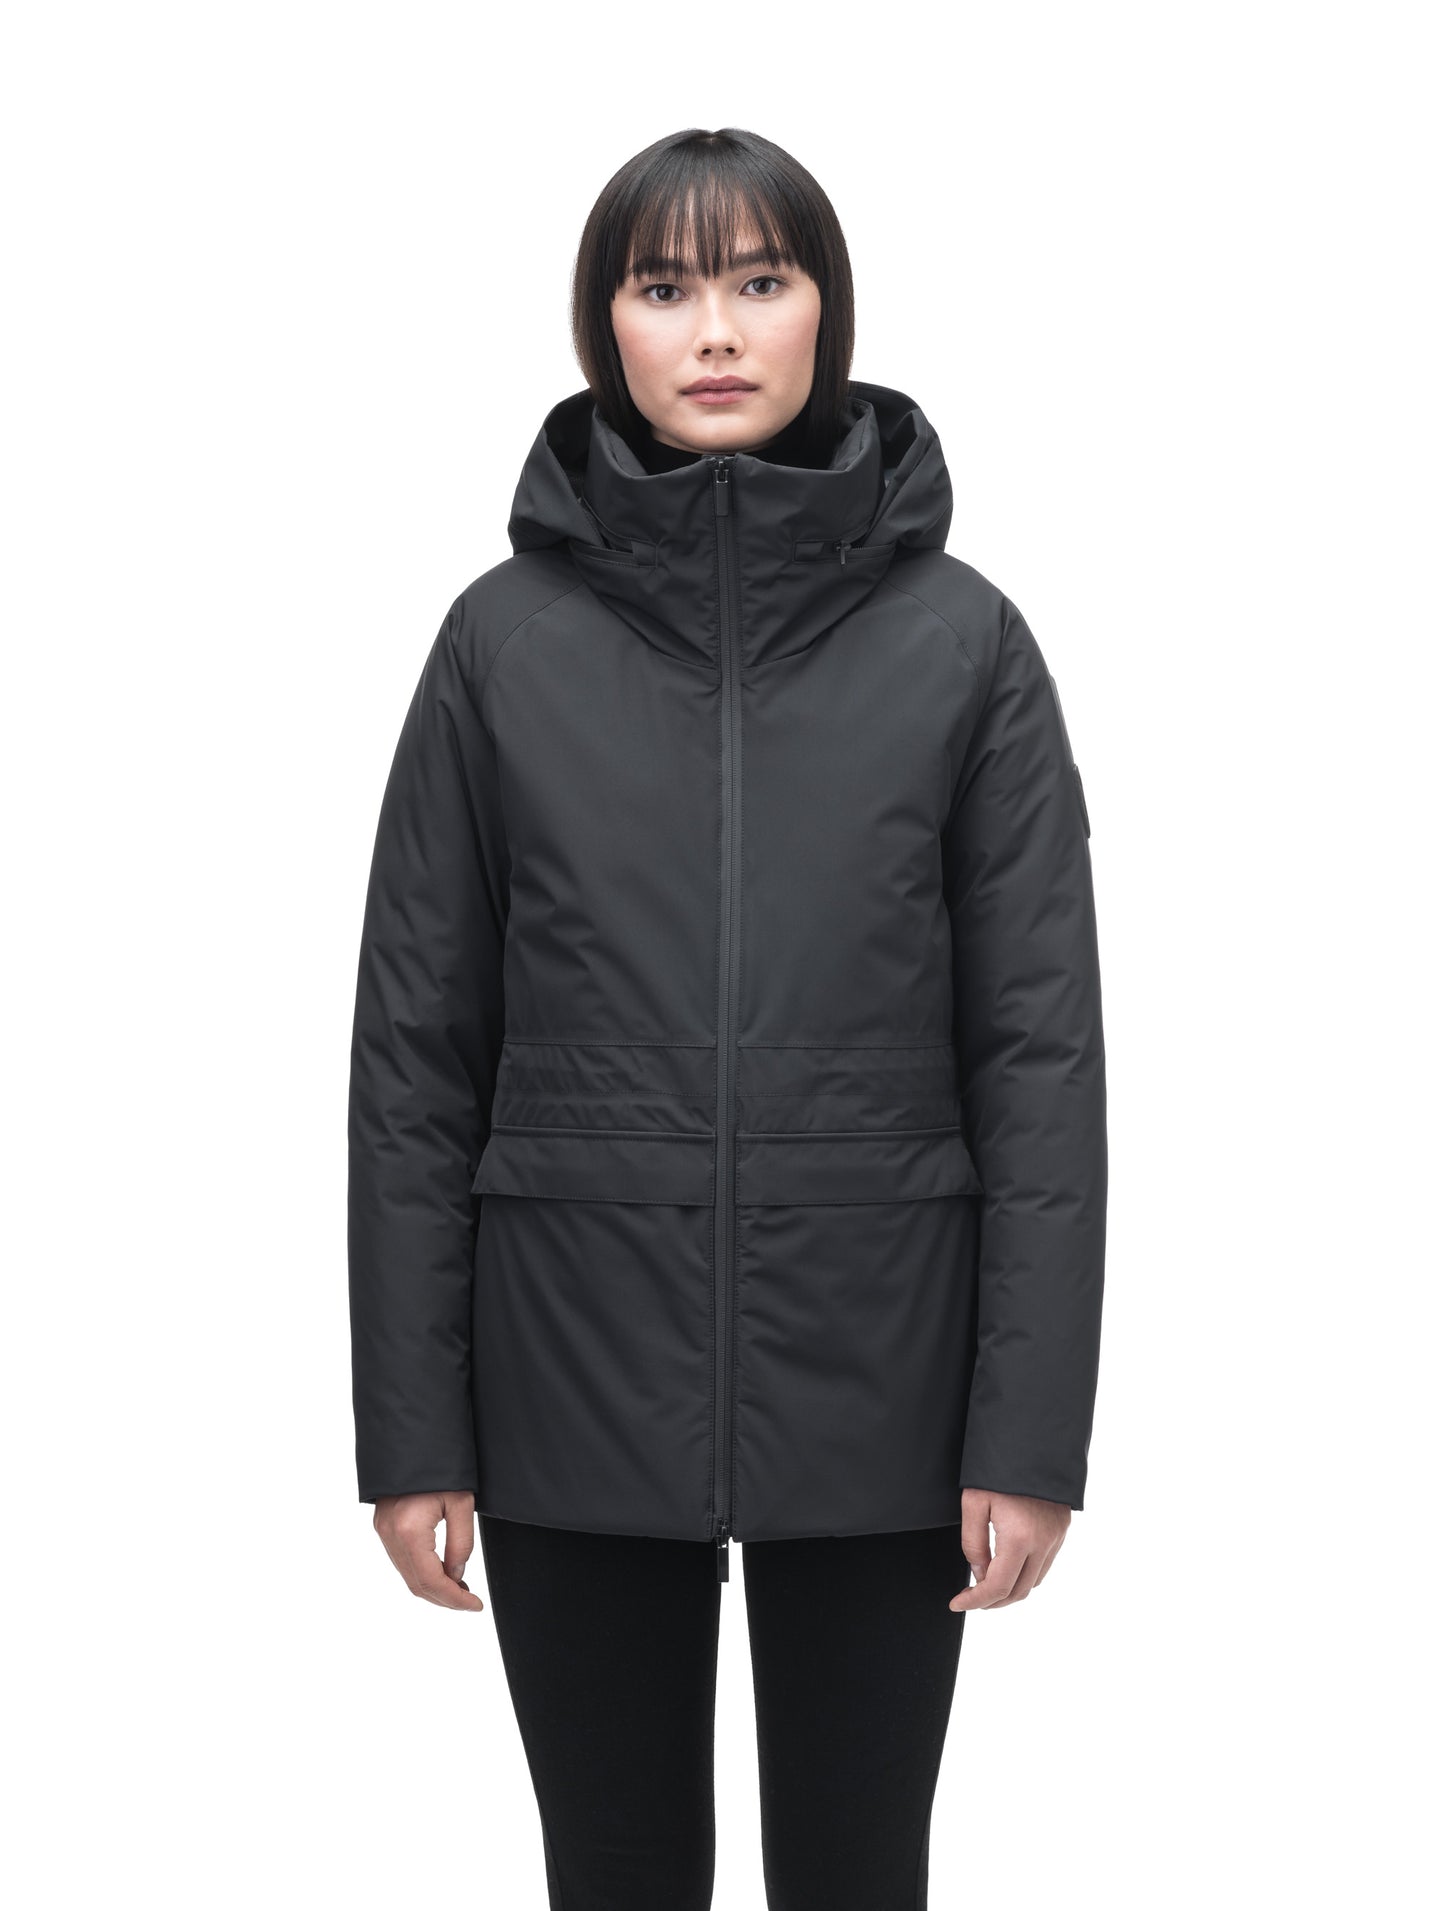 Litho Ladies Short Parka in hip length, Canadian duck down insulation, tuckable waterproof hood, and two-way zipper, in Black